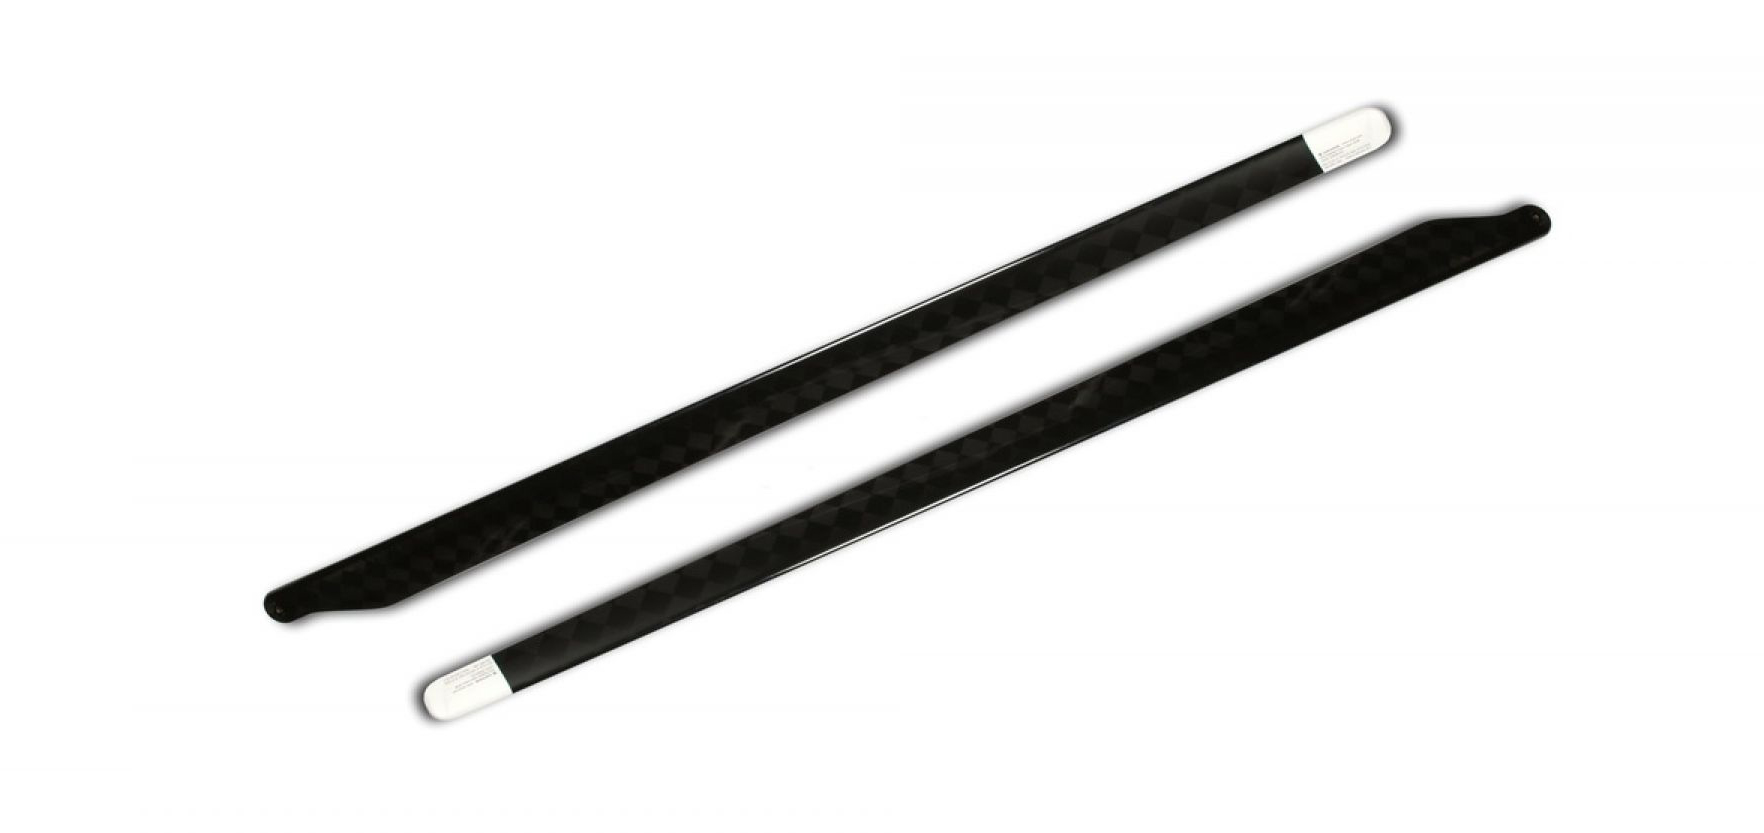 HELICOPTER MAIN ROTOR BLADE 2 X PAIRS BLACK 160MM LONG 